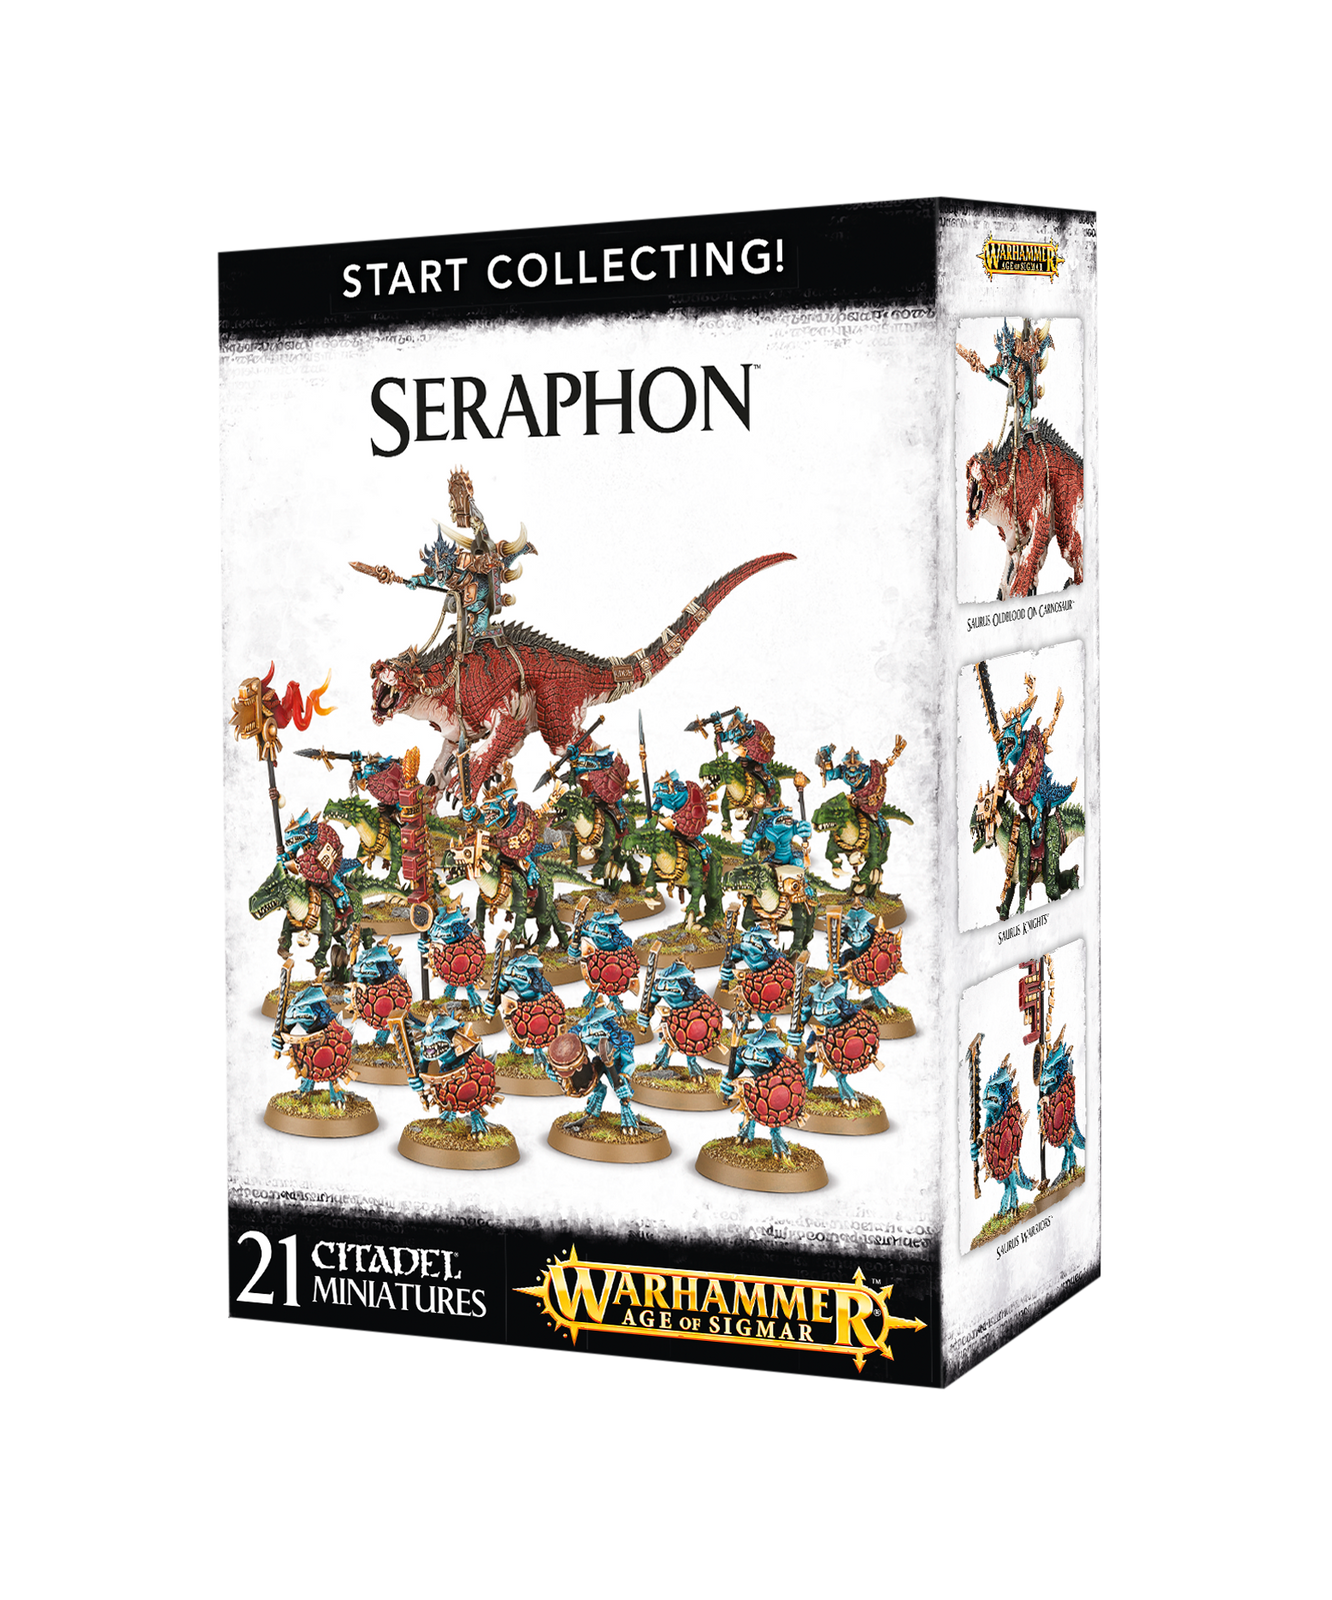 Box image for Start collecting Seraphon